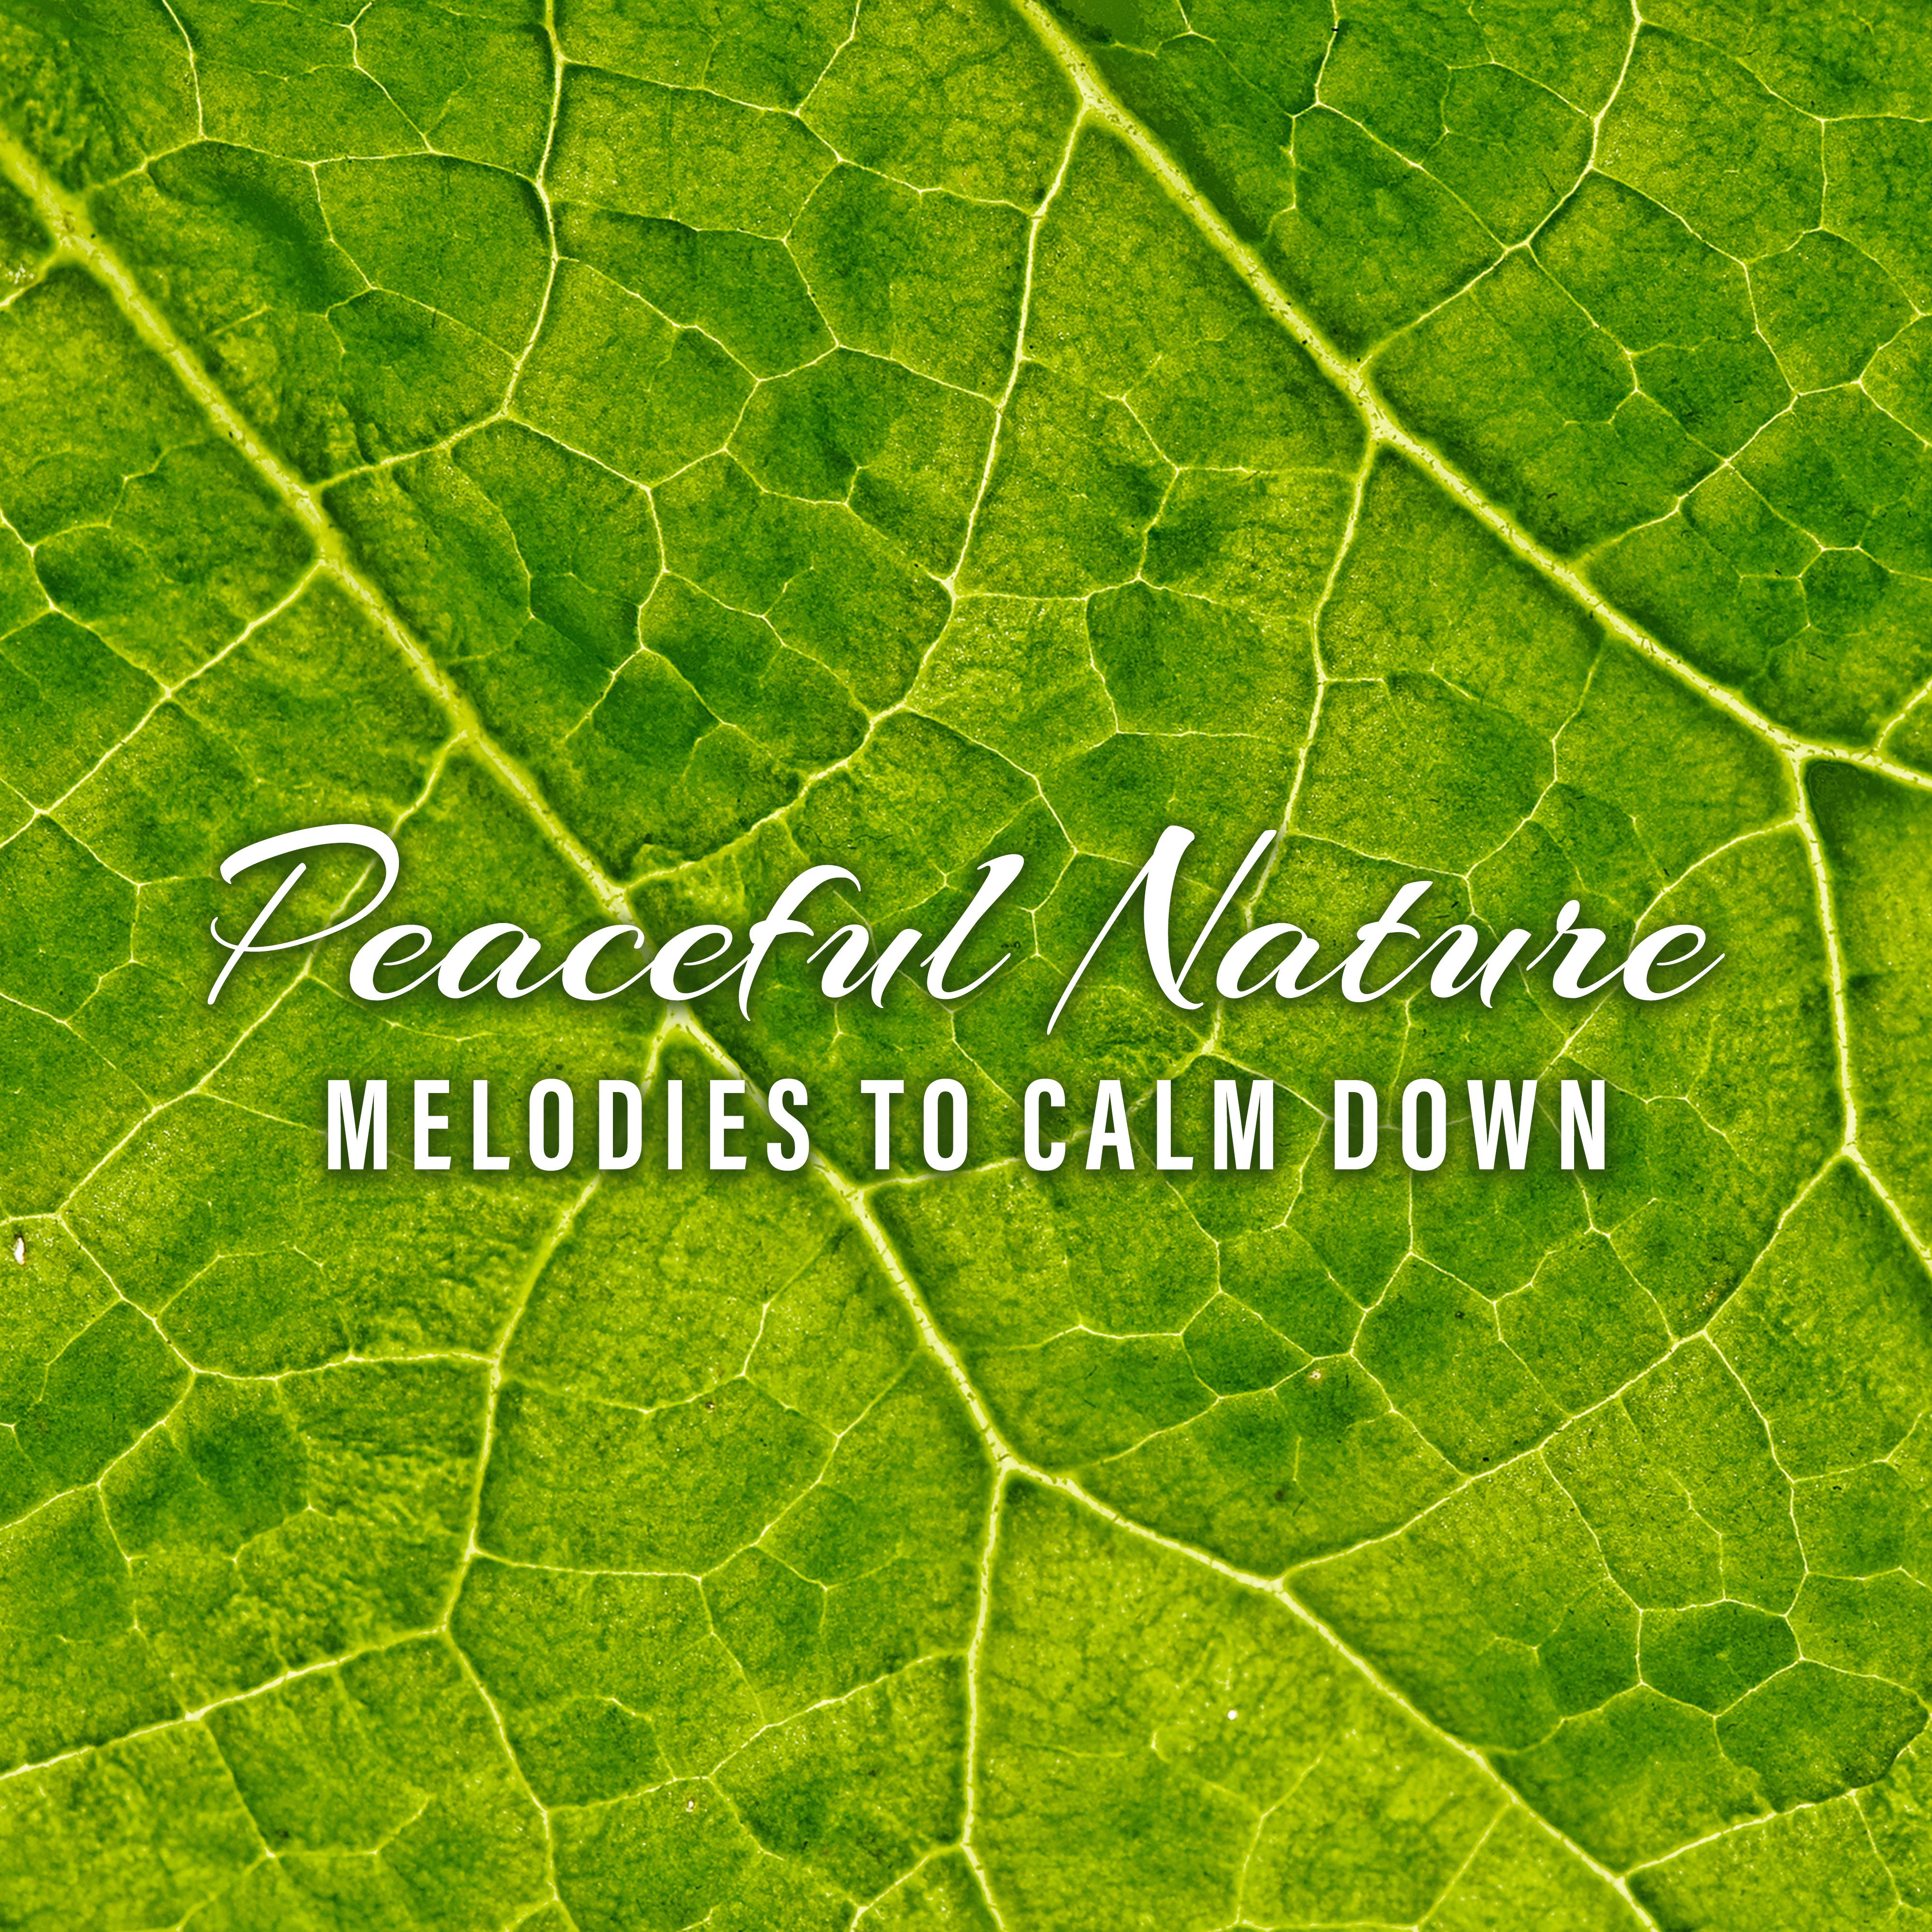 Peaceful Nature Melodies to Calm Down